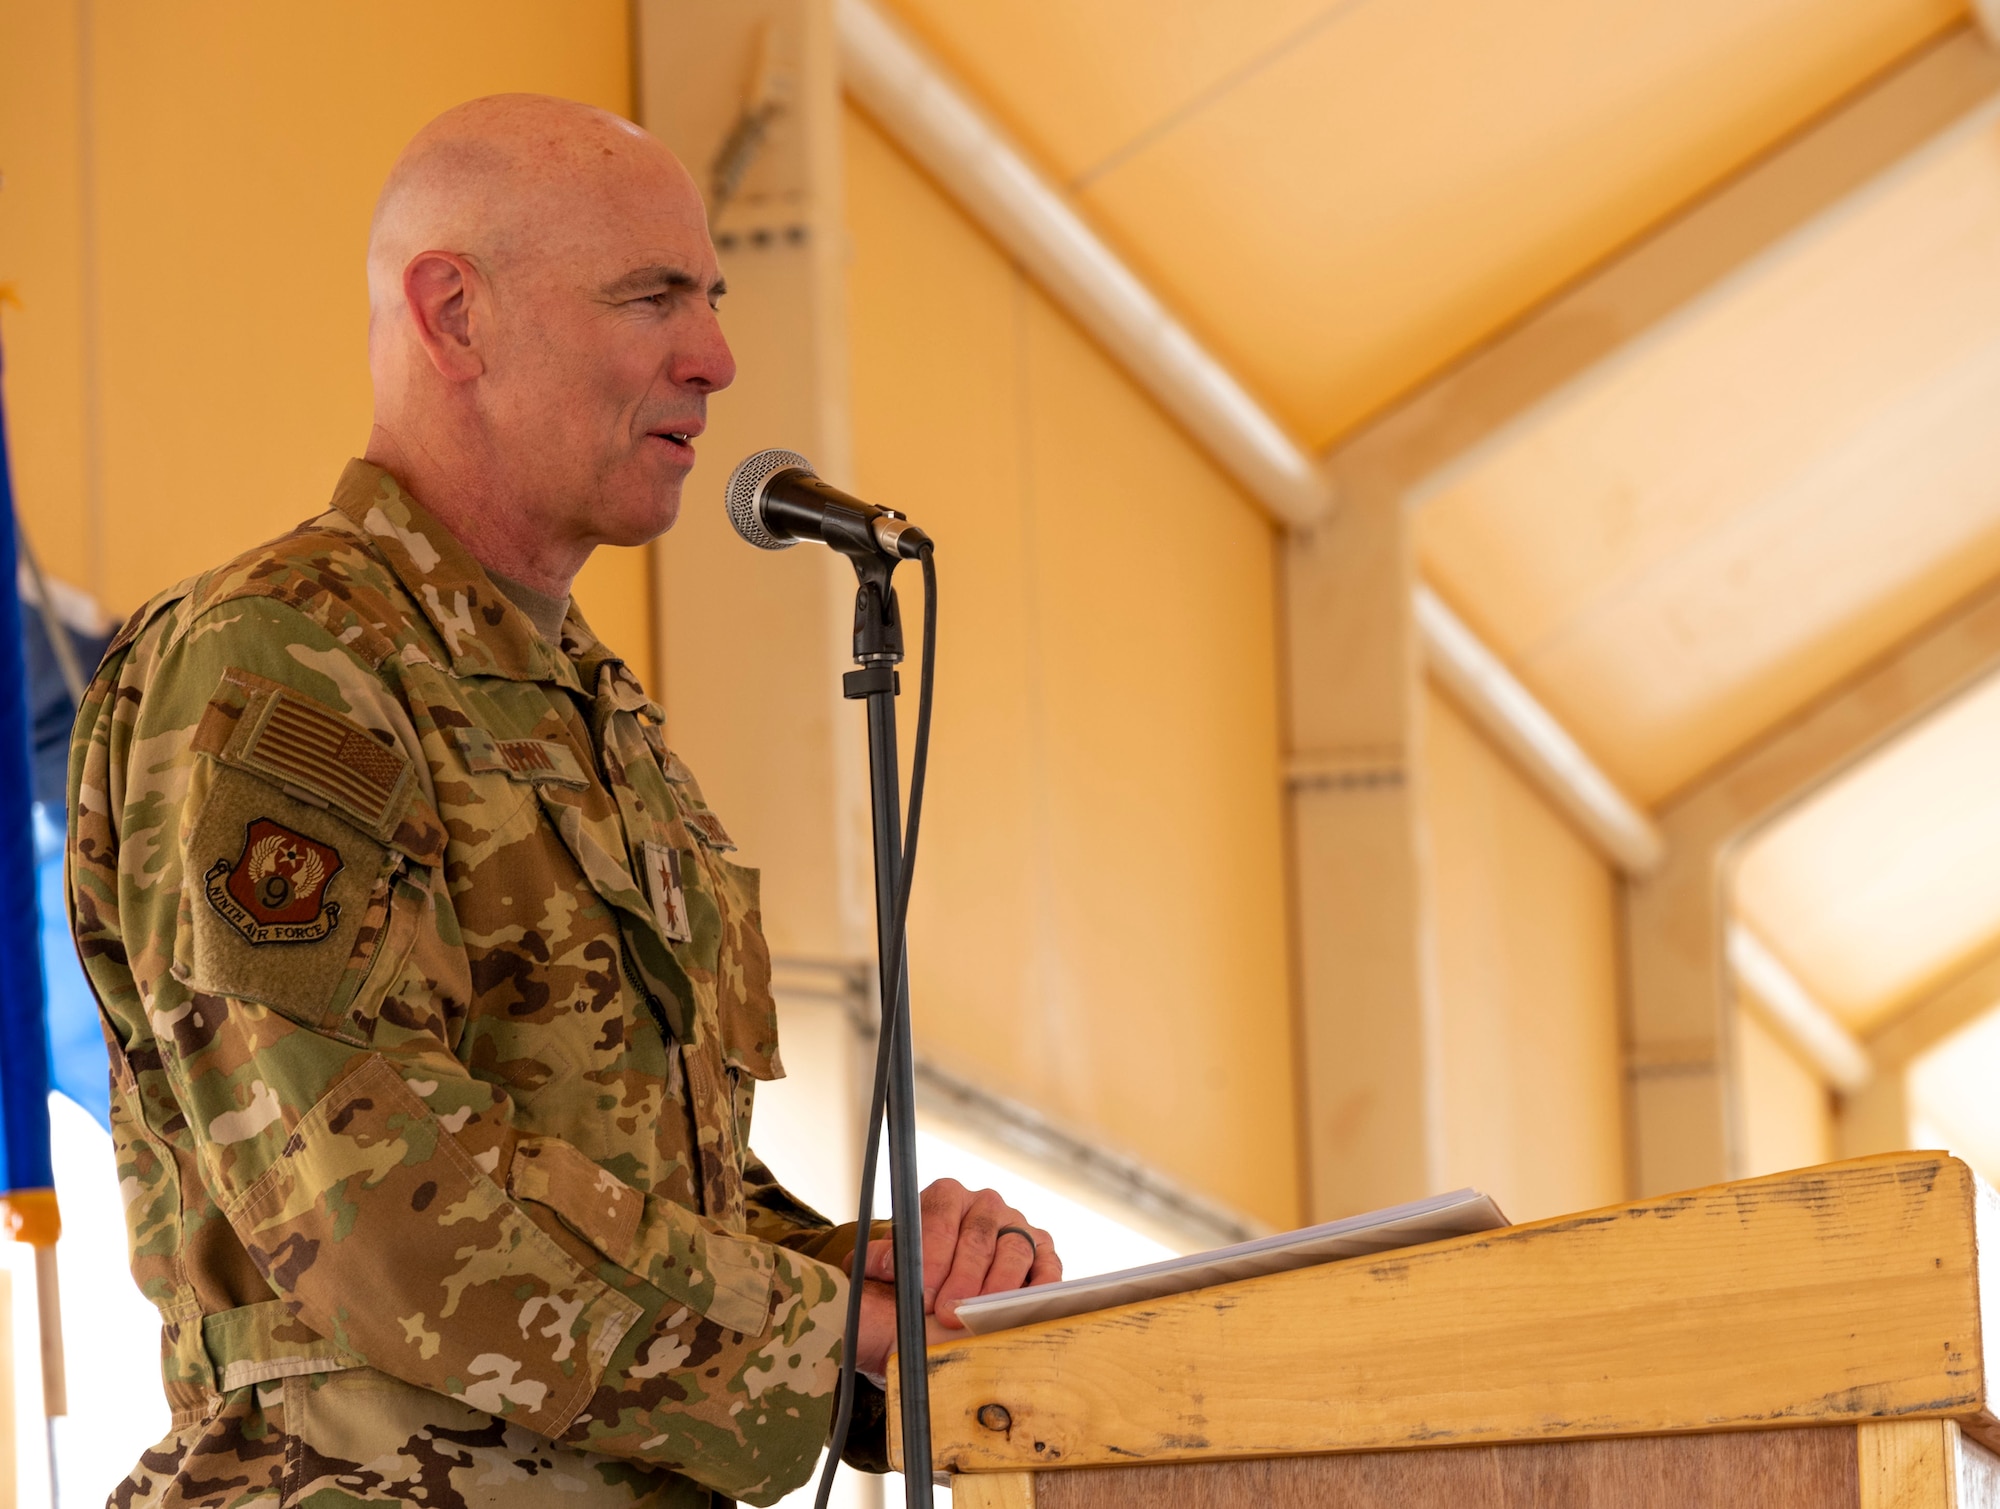 U.S. Air Force Maj. Gen. Clark Quinn, Ninth Air Force deputy commander, speaks during a change of command ceremony at Prince Sultan Air Base, Kingdom of Saudi Arabia, May 18, 2023. During the ceremony, Brig. Gen. William Betts relinquished command of the 378th AEW to Brig. Gen. Akshai Gandhi. The tradition of change of command ceremonies are to allow service members to witness their new leader assume the responsibility and trust associated with the position of commander. (U.S. Air Force photo by Senior Airman Stephani Barge)